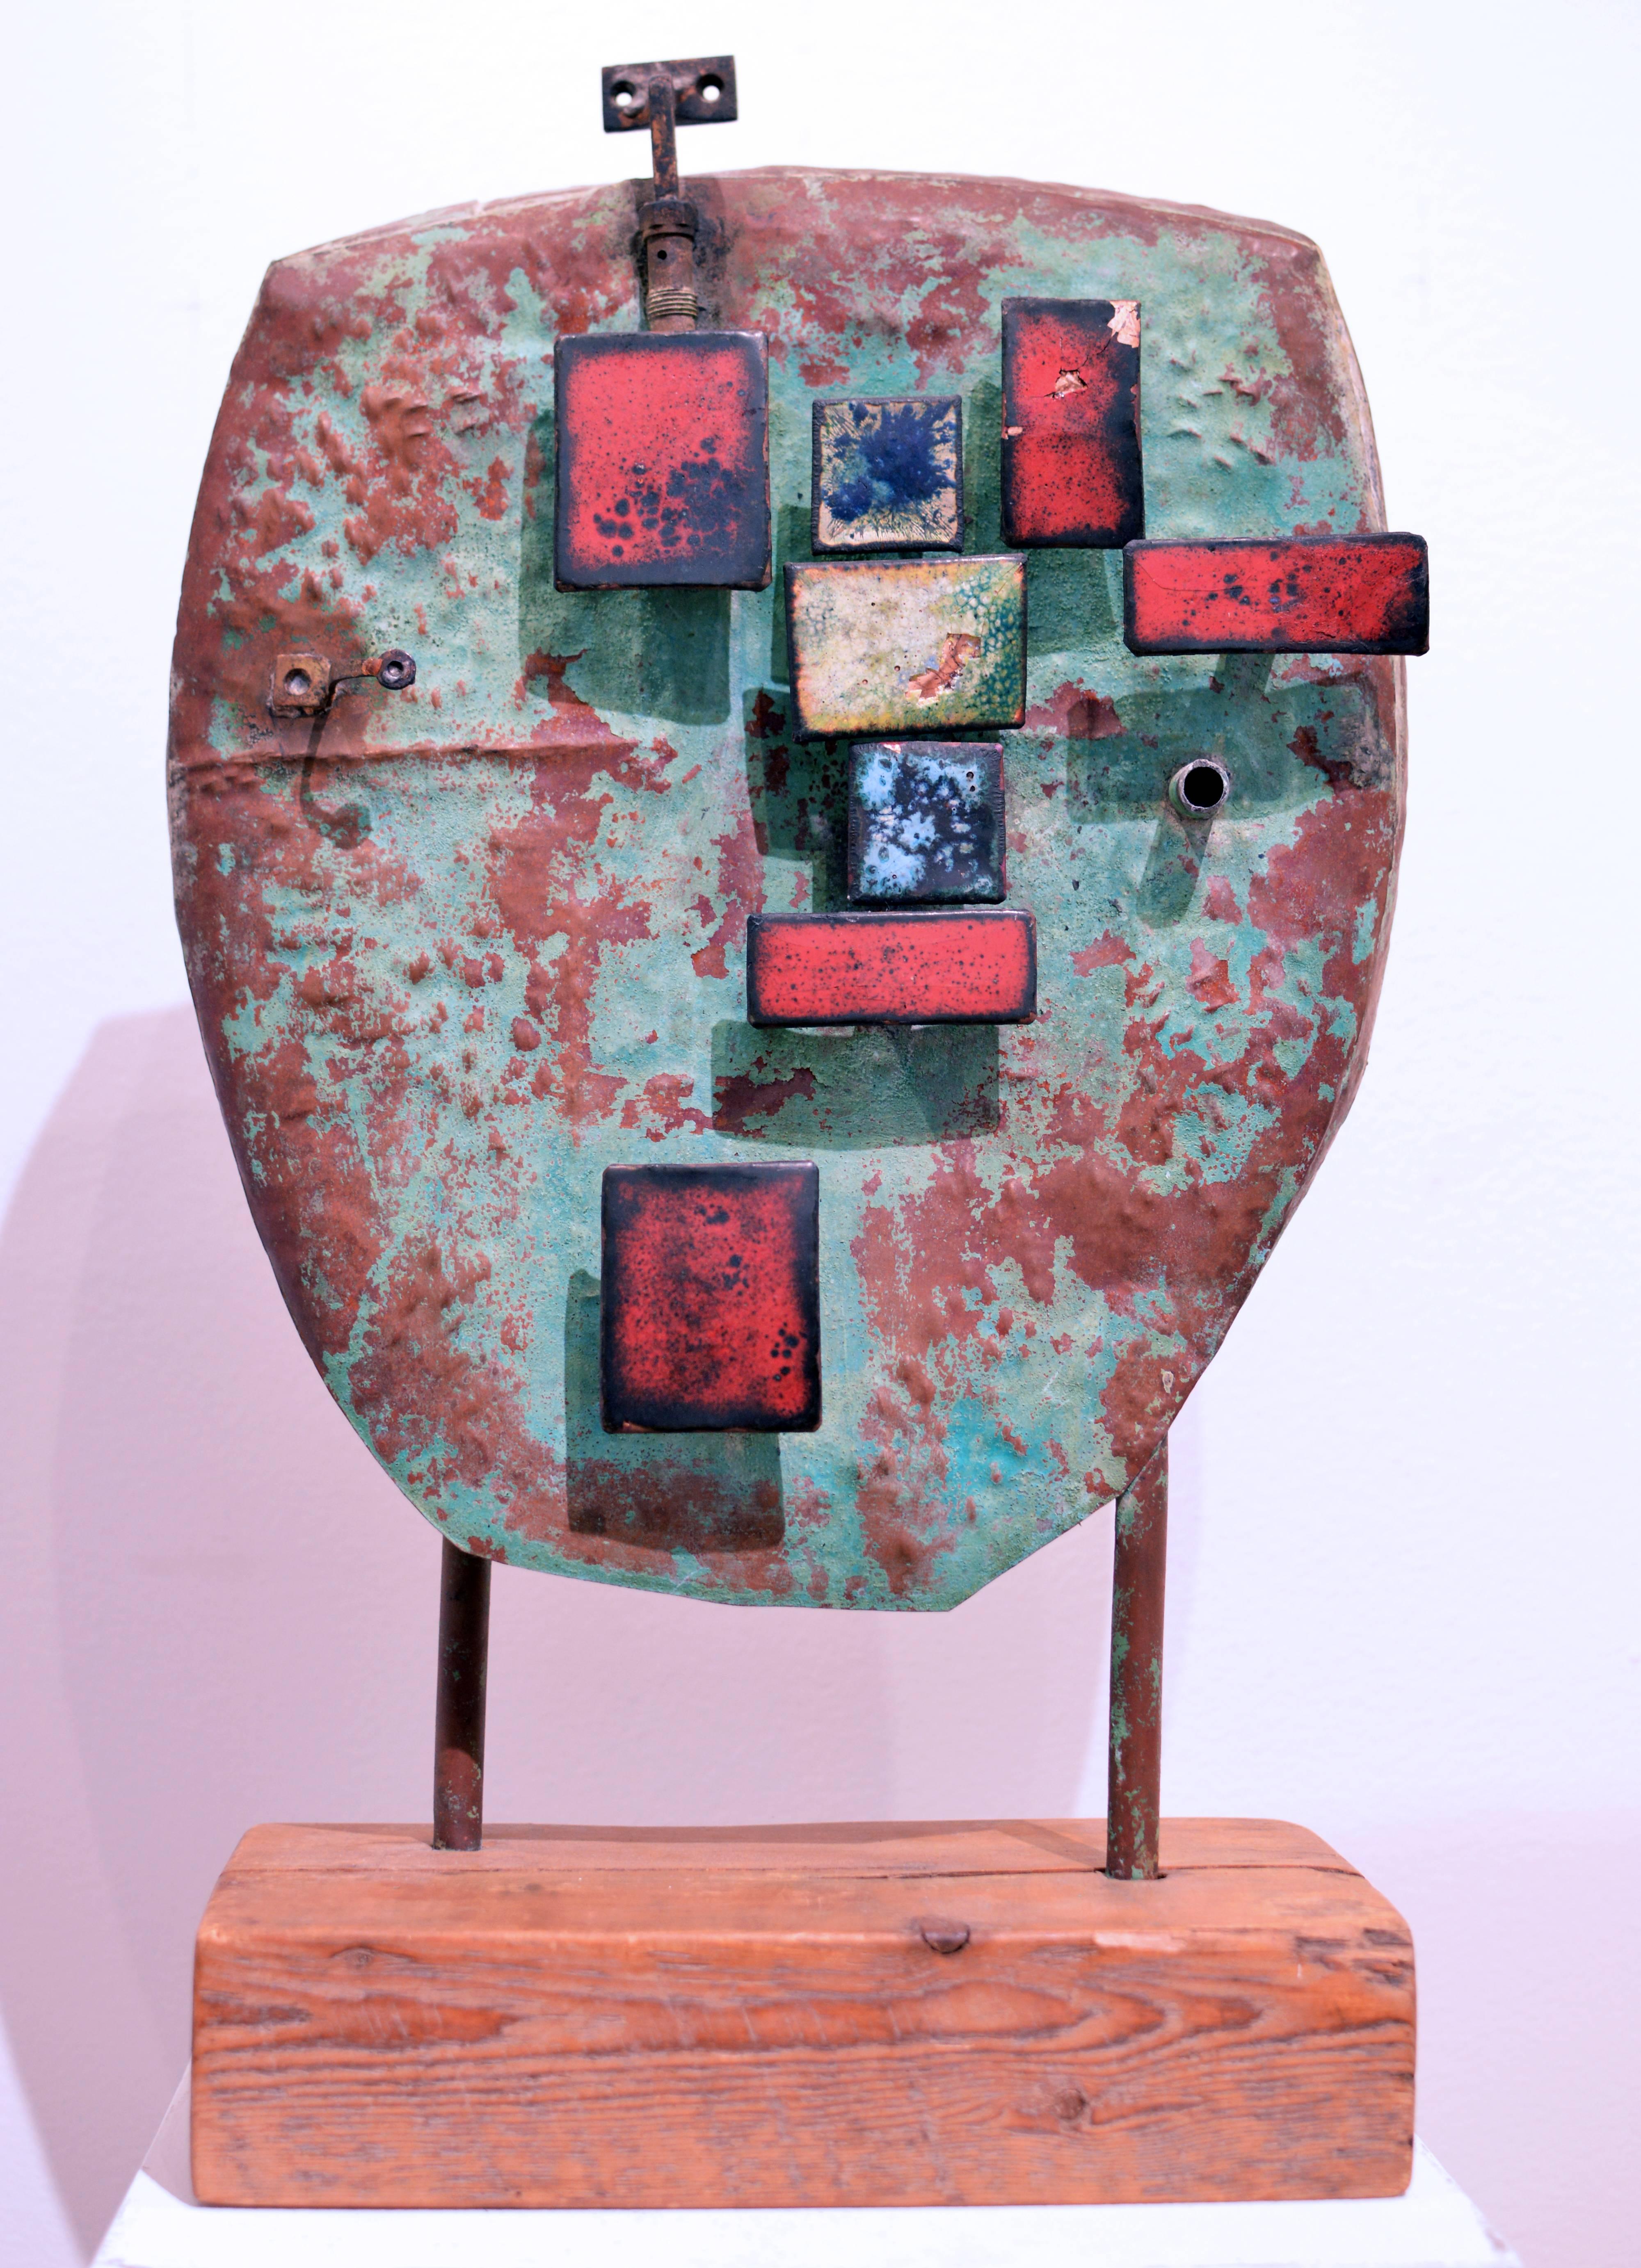 "The General" is an abstract sculpture by Modernist artist, Stanley Bate. Made circa 1960, the sculpture is made of wood and metal, and features red, blue, and off-white rectangular shapes over top a textured piece of metal that is reddish and green